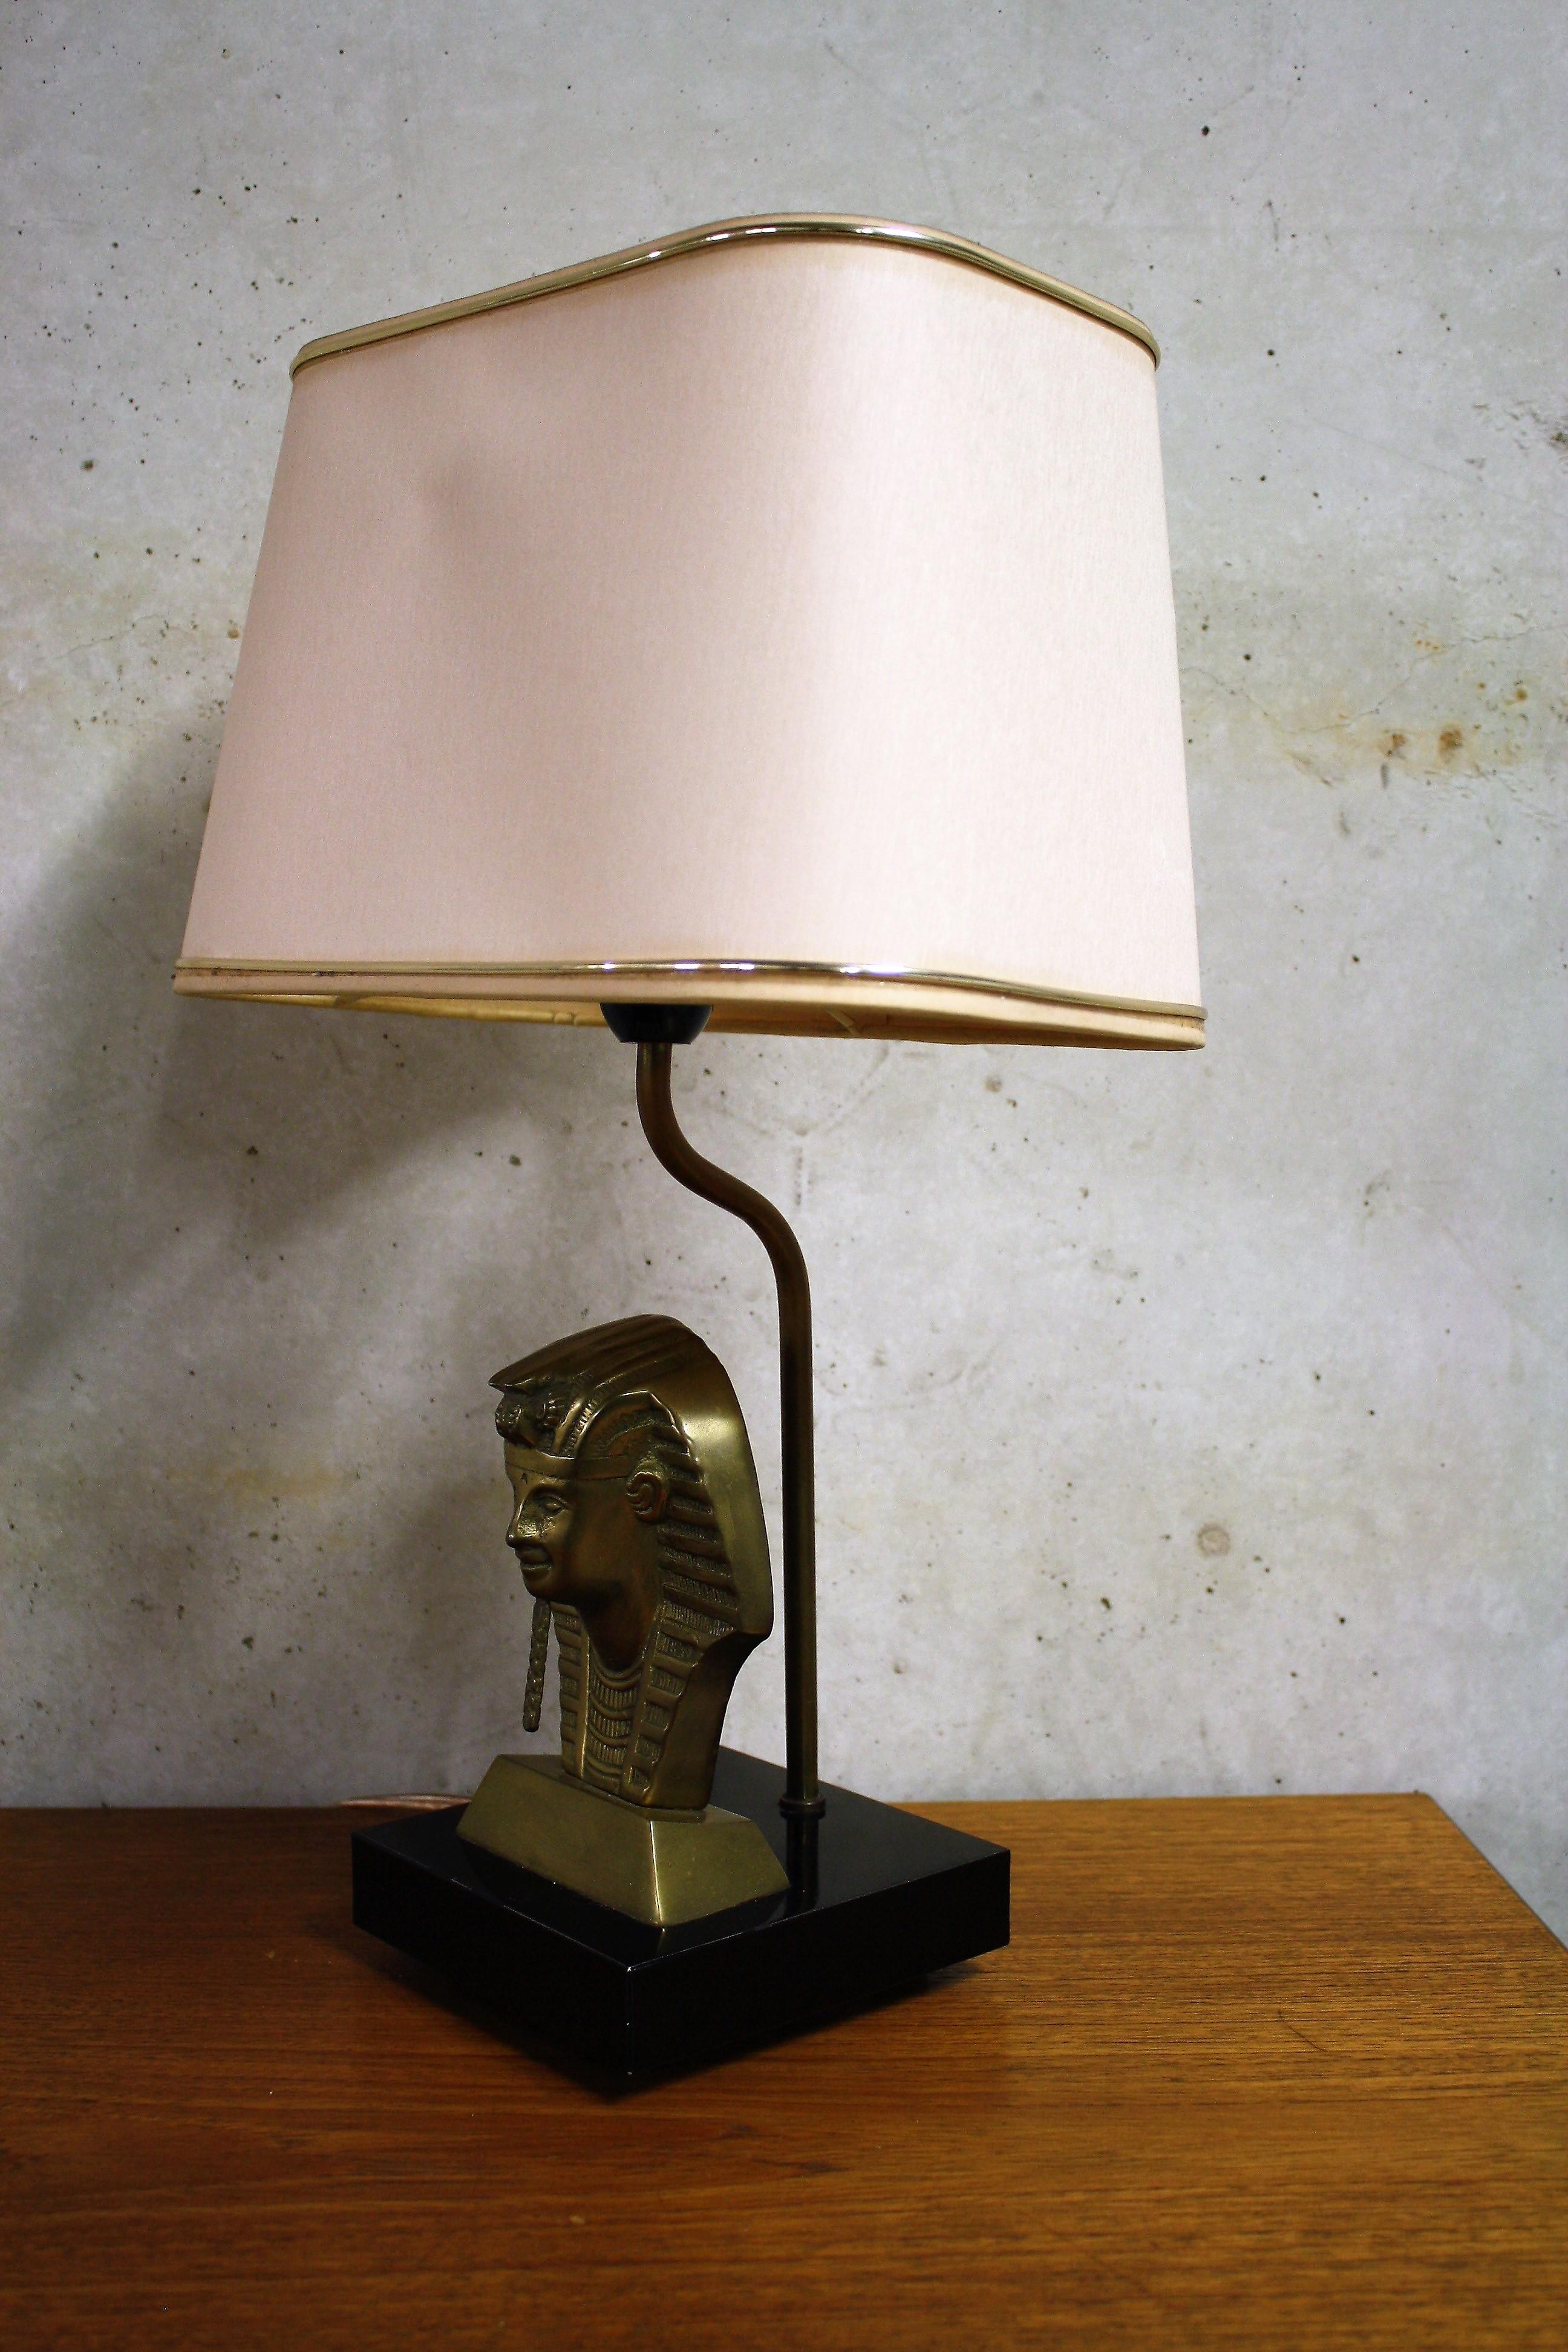 Sculptural pharaoh head table lamp.

The lamp is made from metal on a stone base and comes with it's original shade.

The table lamp emits a warm light and creates a little ambience on it's own.

This Belgian table lamp fits in the popular